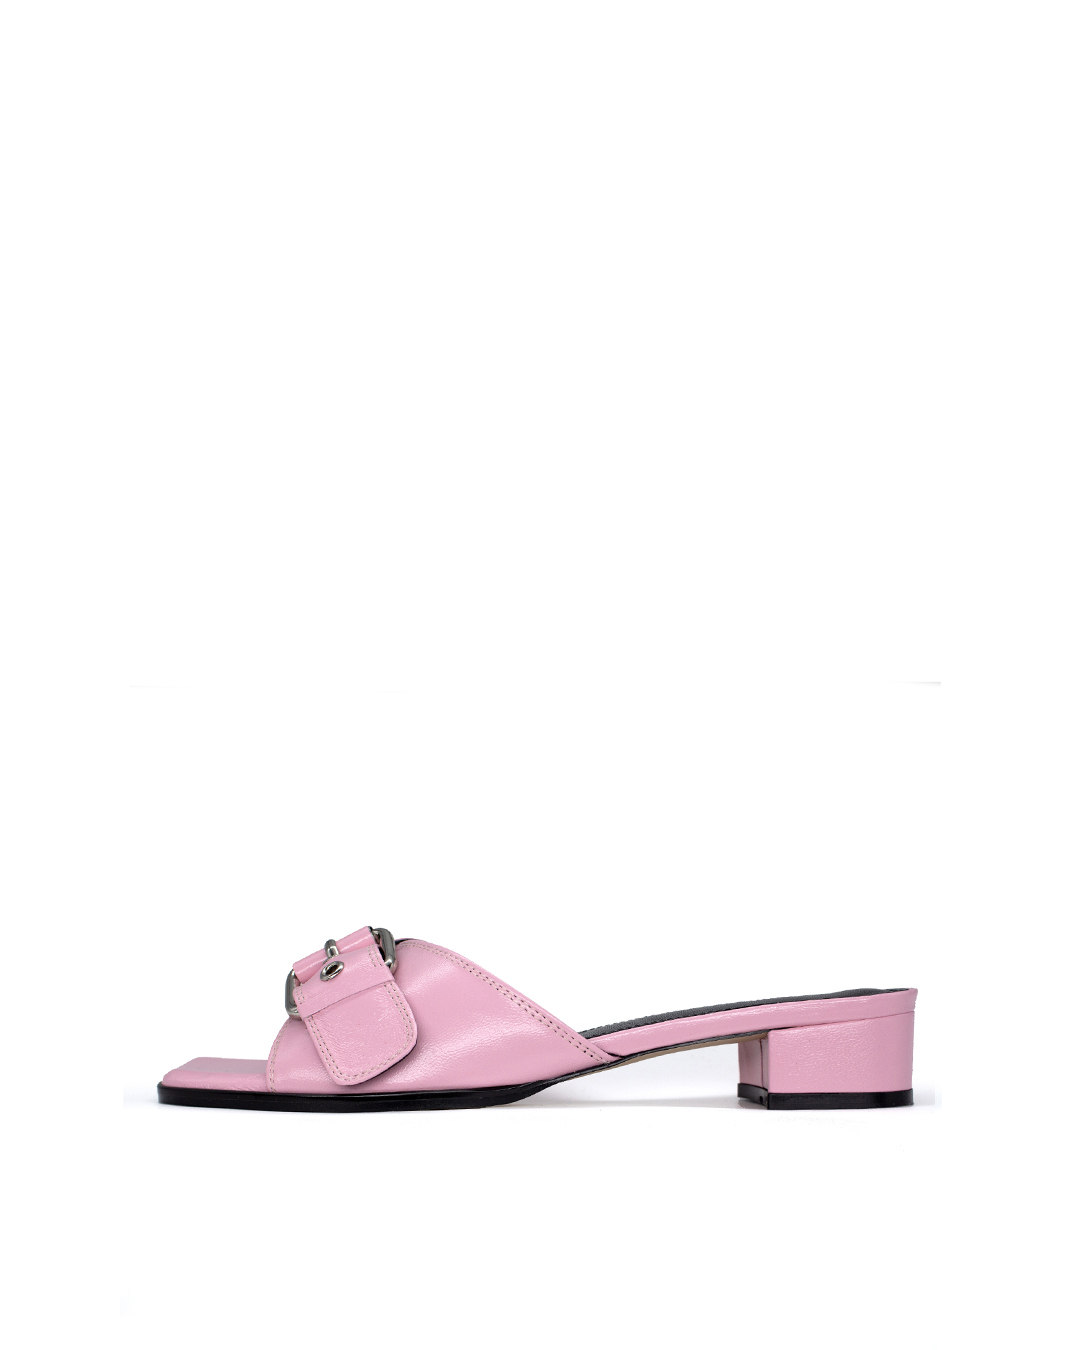 Allure Buckle Mules - PINK((10%off -6/11까지))